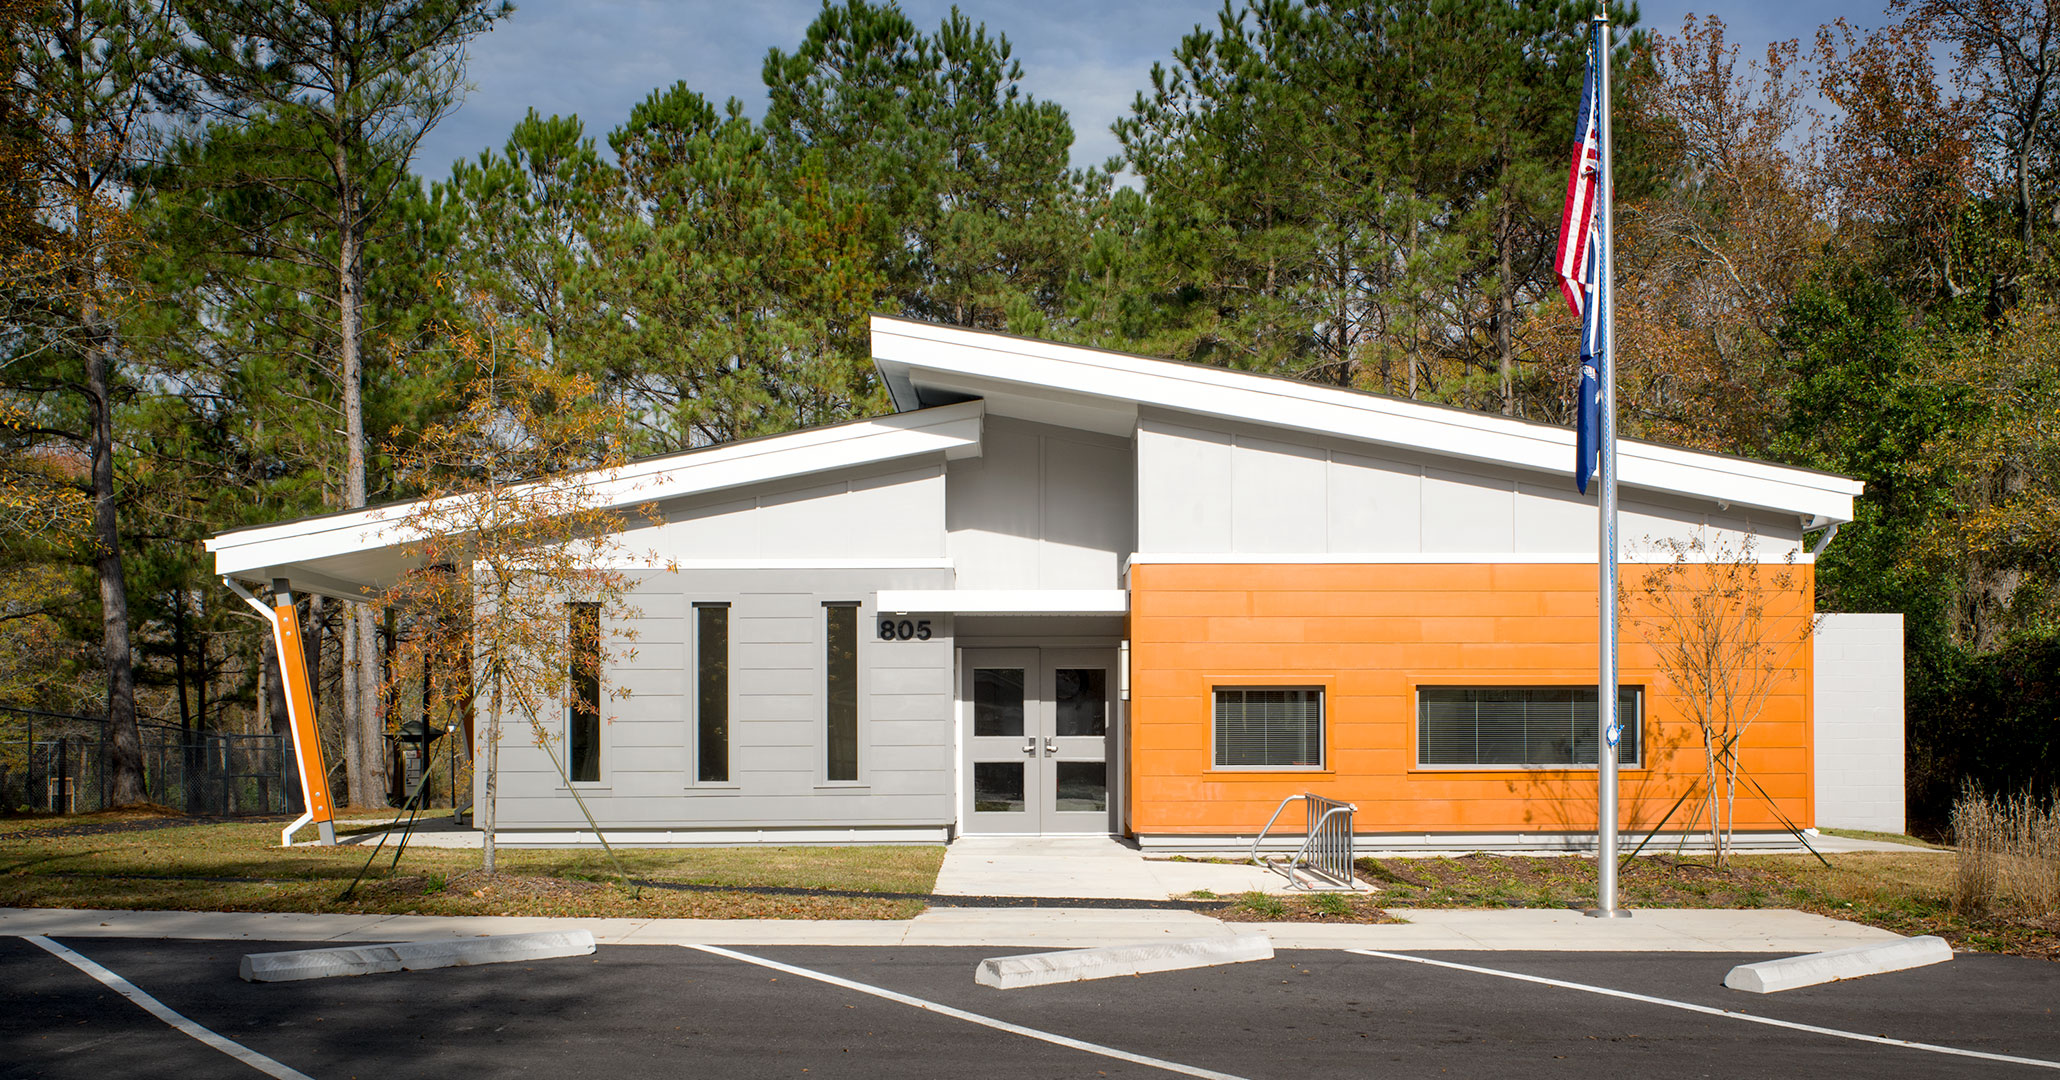 Richland County Recreation worked with Boudreaux architects to design and build the Ridgewood Community Center.